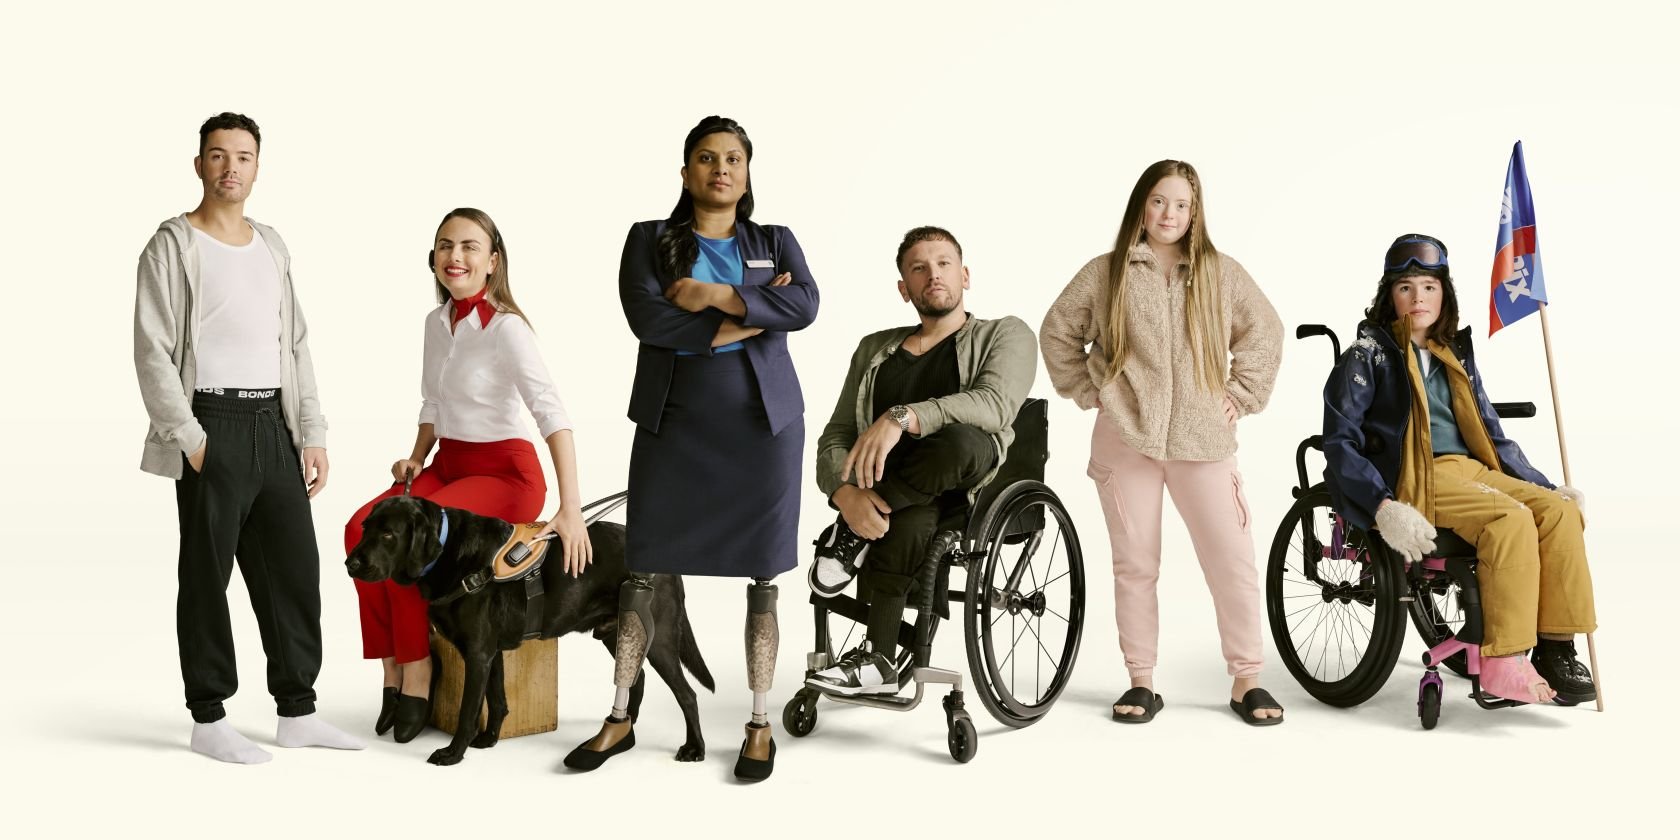 AAMI seeks to revolutionise disability in Australian media by joining Shift 20 initiative